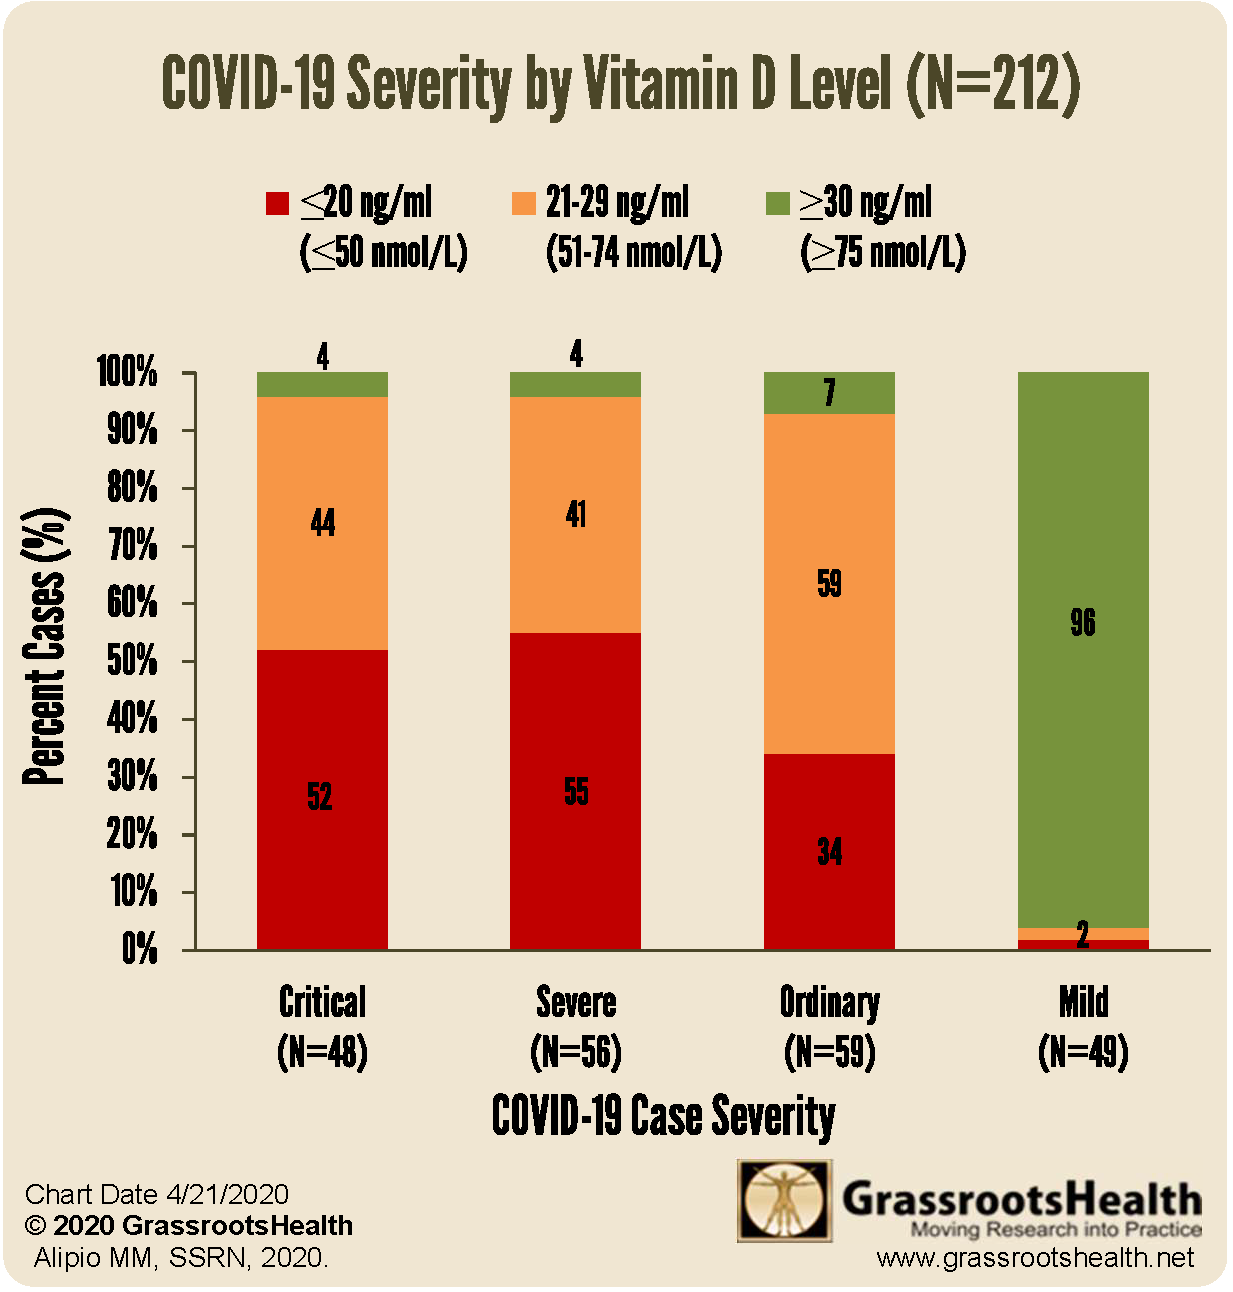 First Data to be Published on COVID-19 Severity and Vitamin D Levels